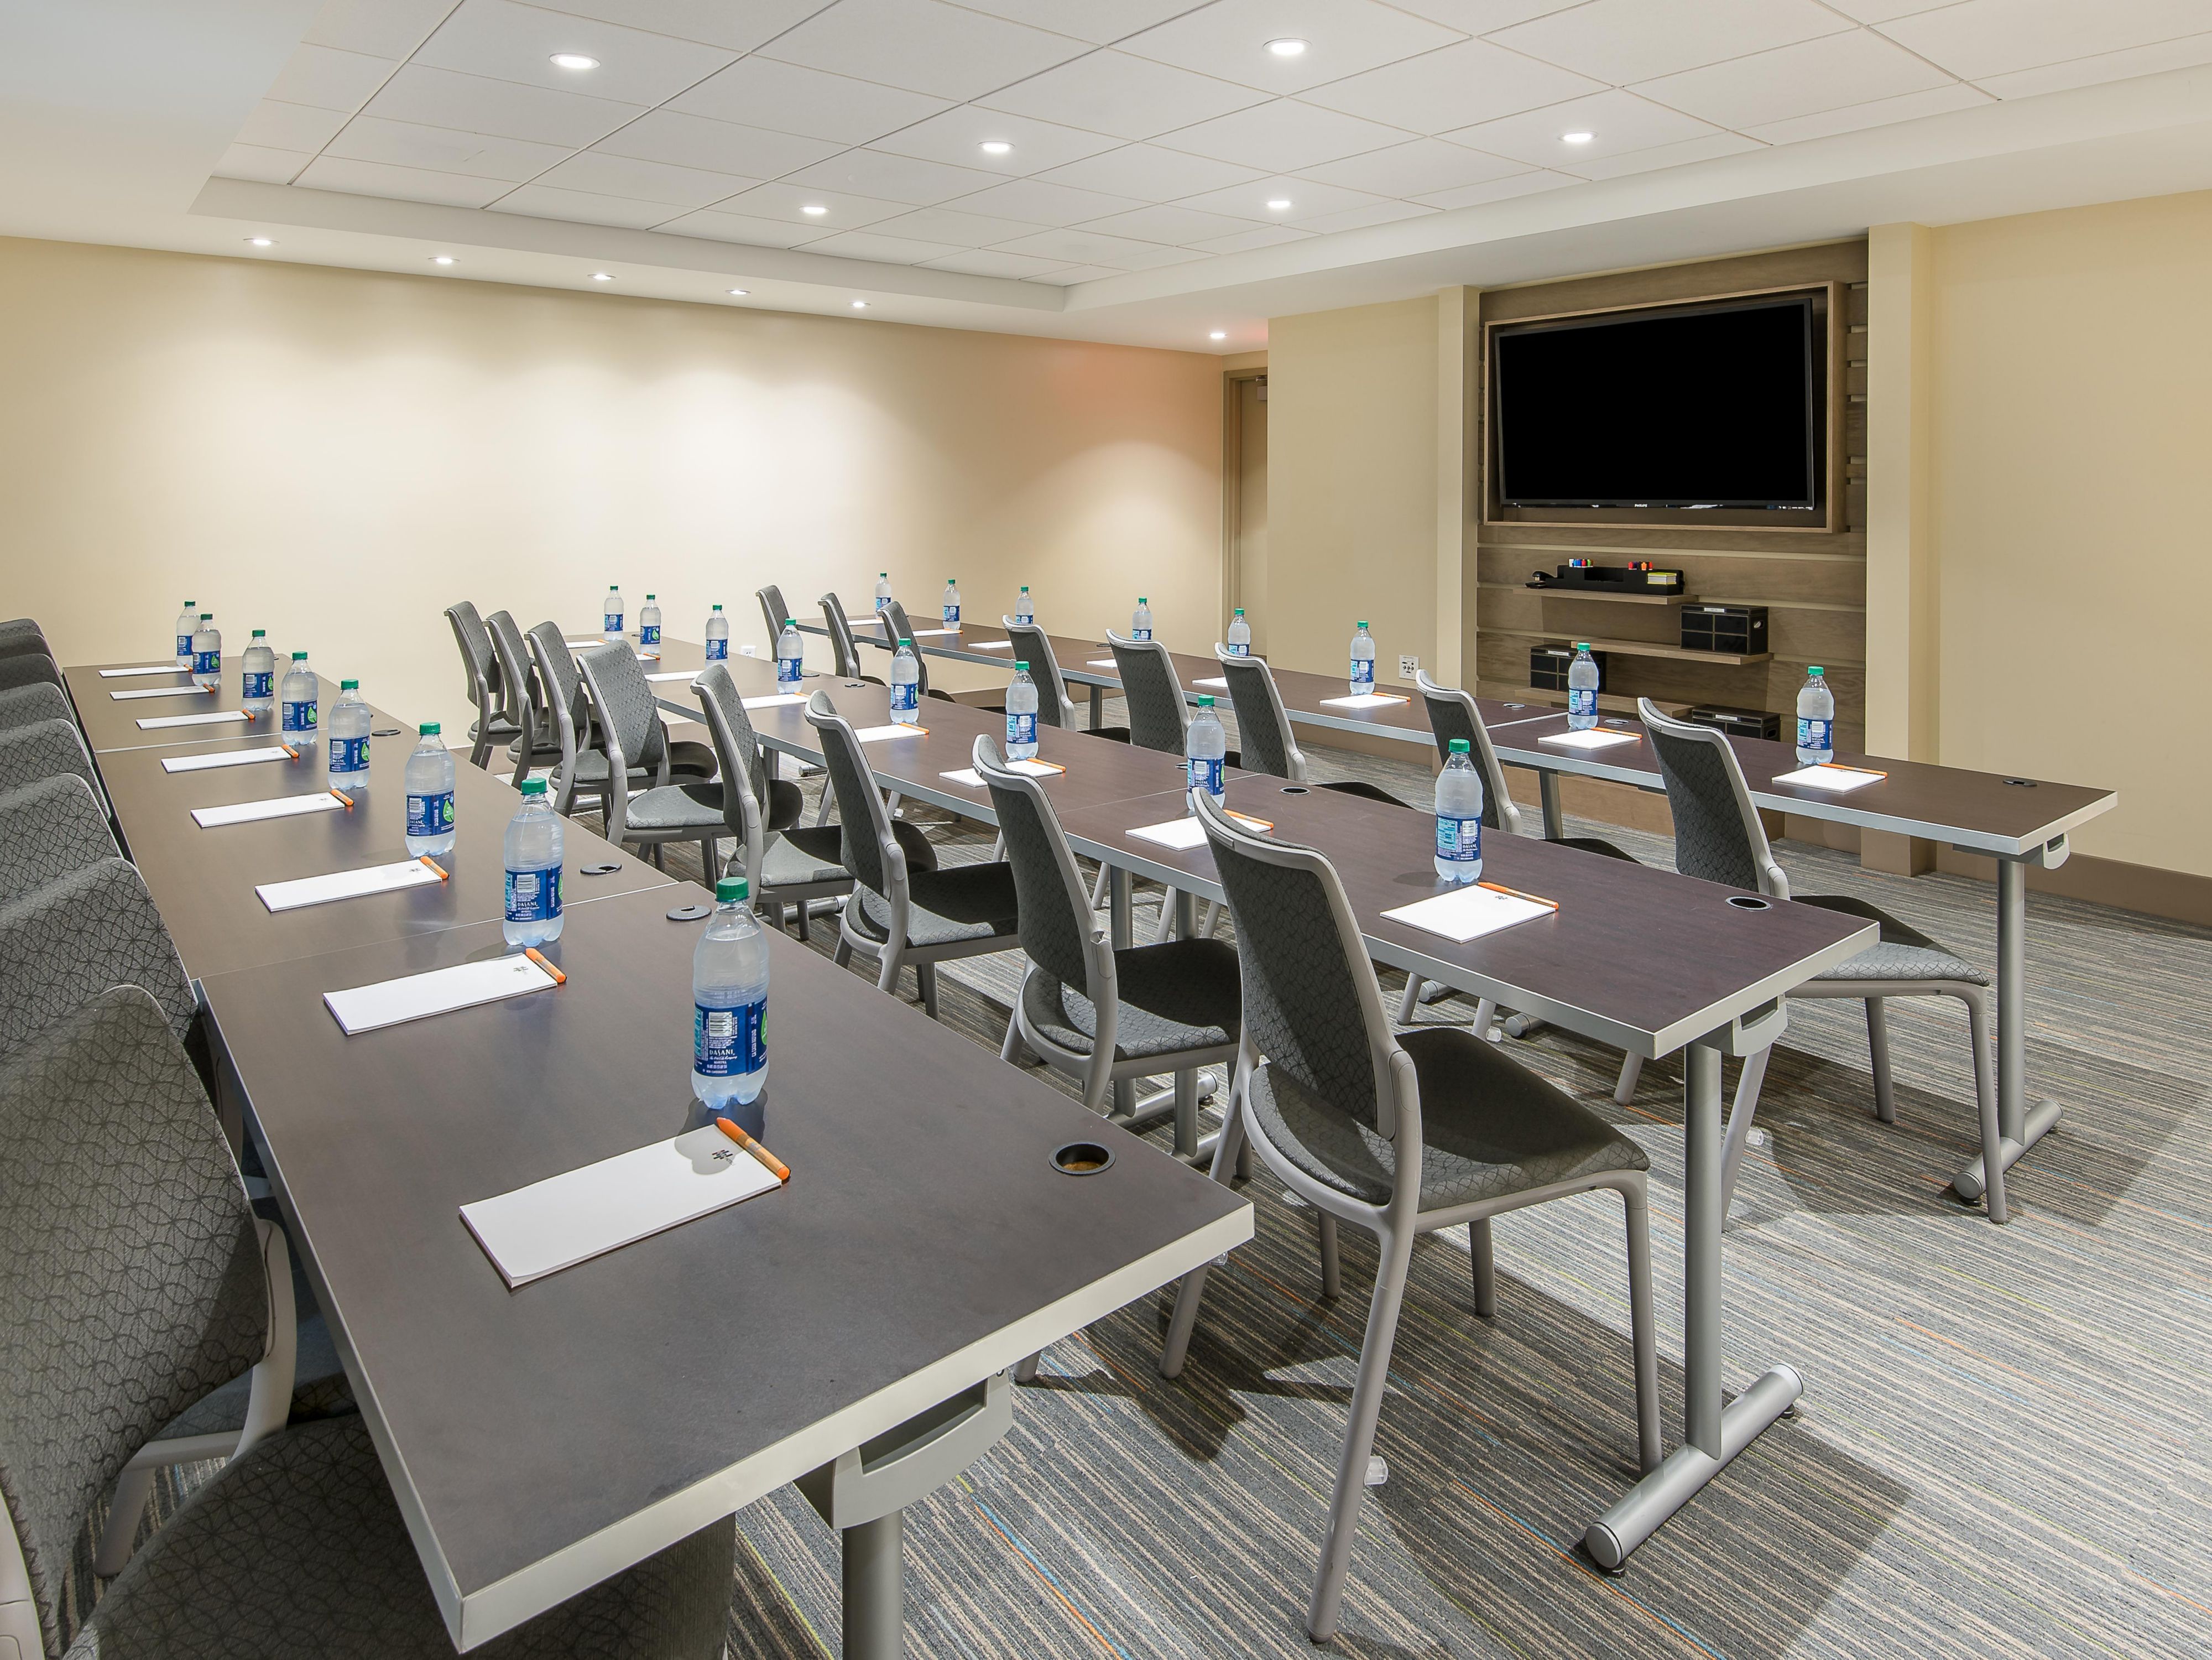 With two meeting rooms and an ideal location, our hotel is a great place to host a hybrid meeting or events for small groups. With modern furnishings, complimentary Wi-Fi, and a high standard of cleanliness, guests can enjoy a productive meeting or a small social gathering in our Norwalk event space. 
